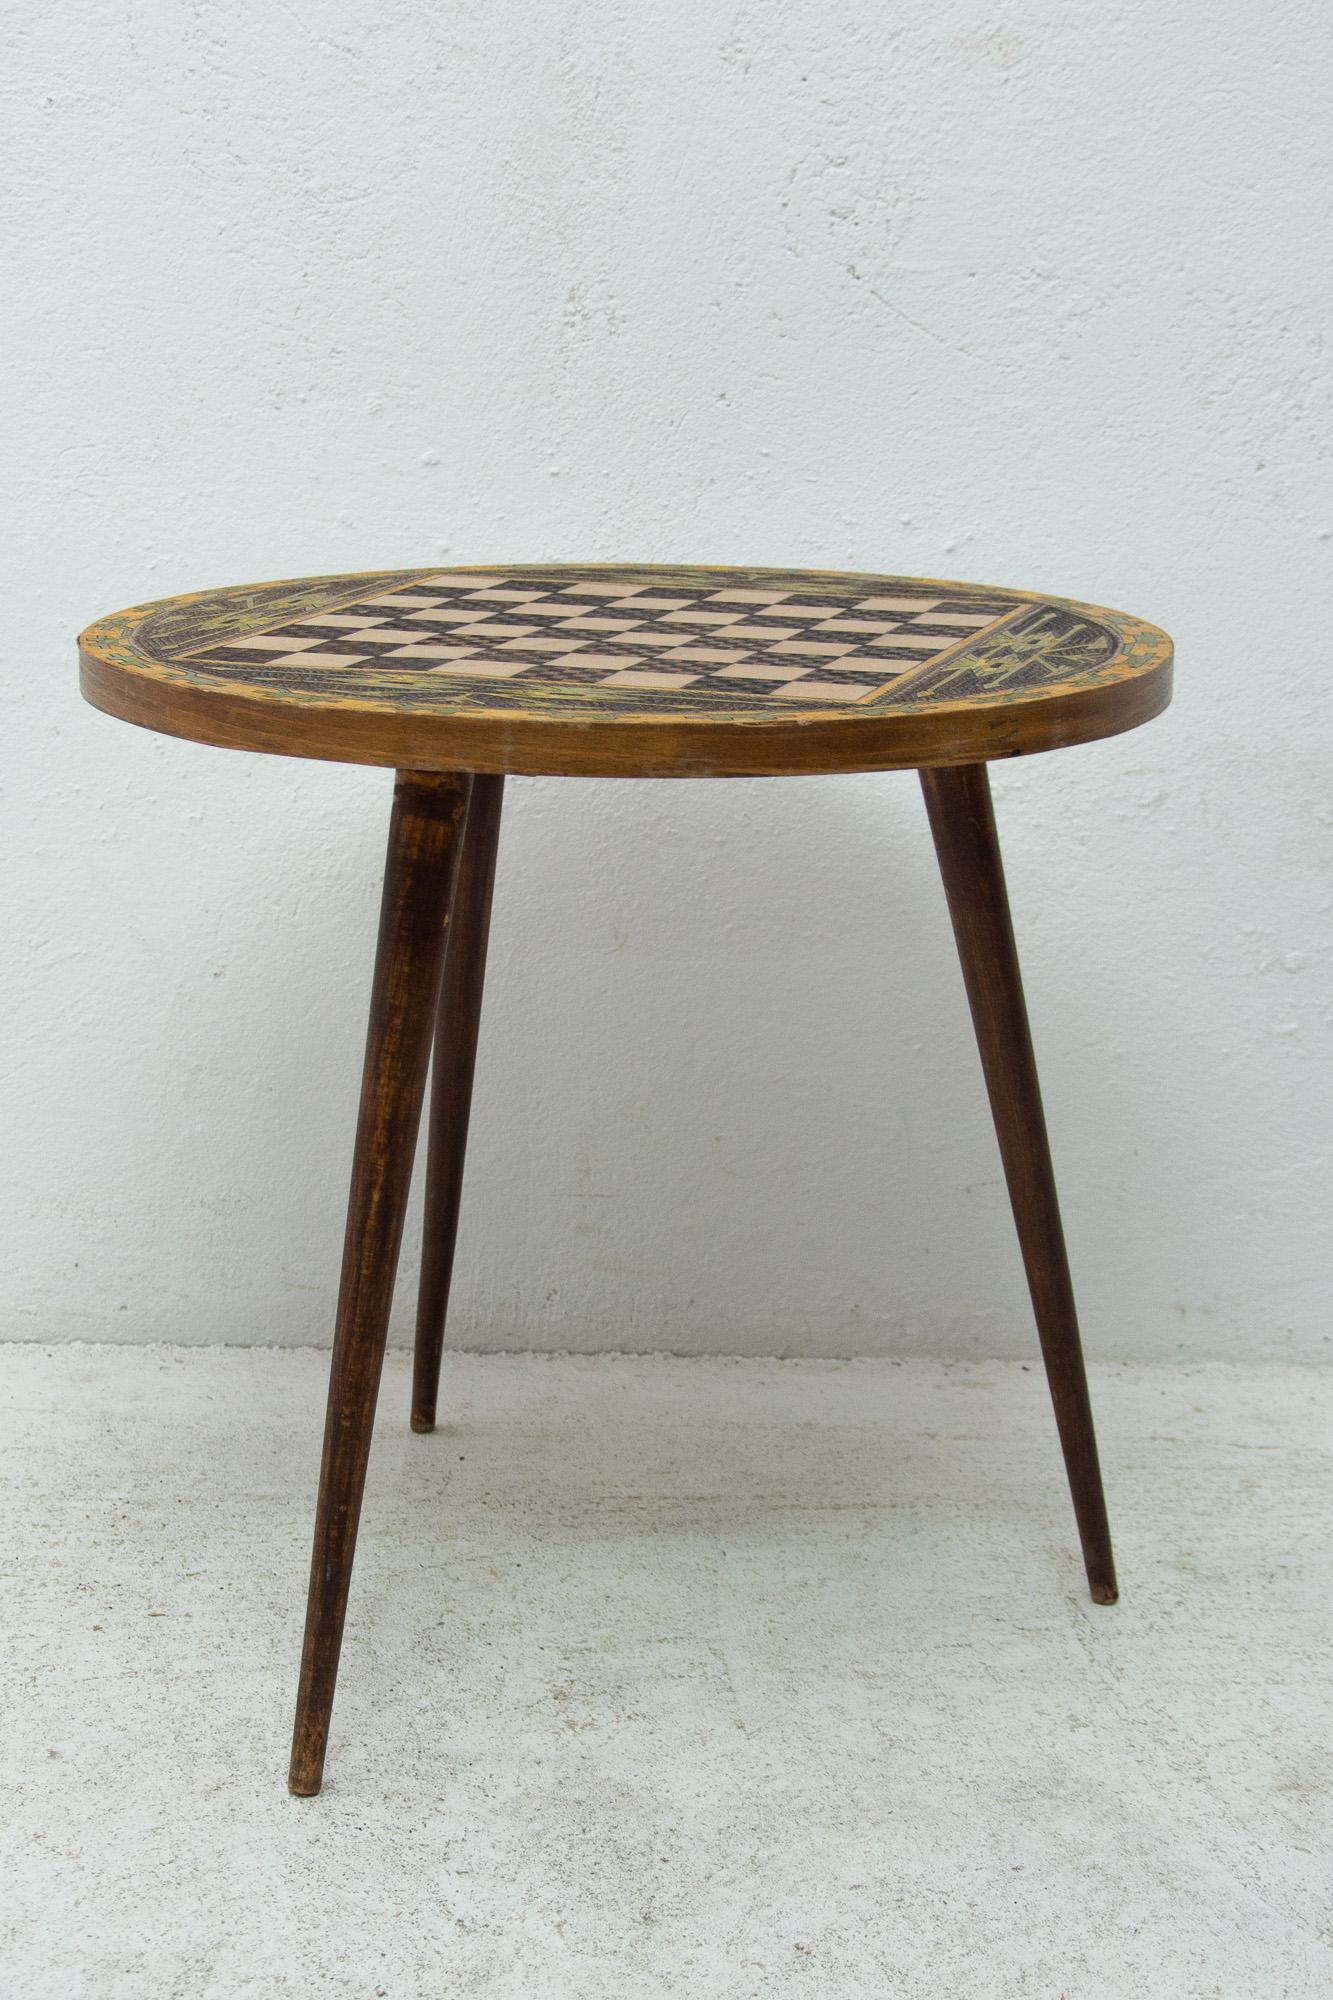 This vintage side table was made in Albania in the 1970s. It´s made of wood and has a chess pattern on the board. Cool retro piece. In good Vintage condition, the surface shows signs of age and using.